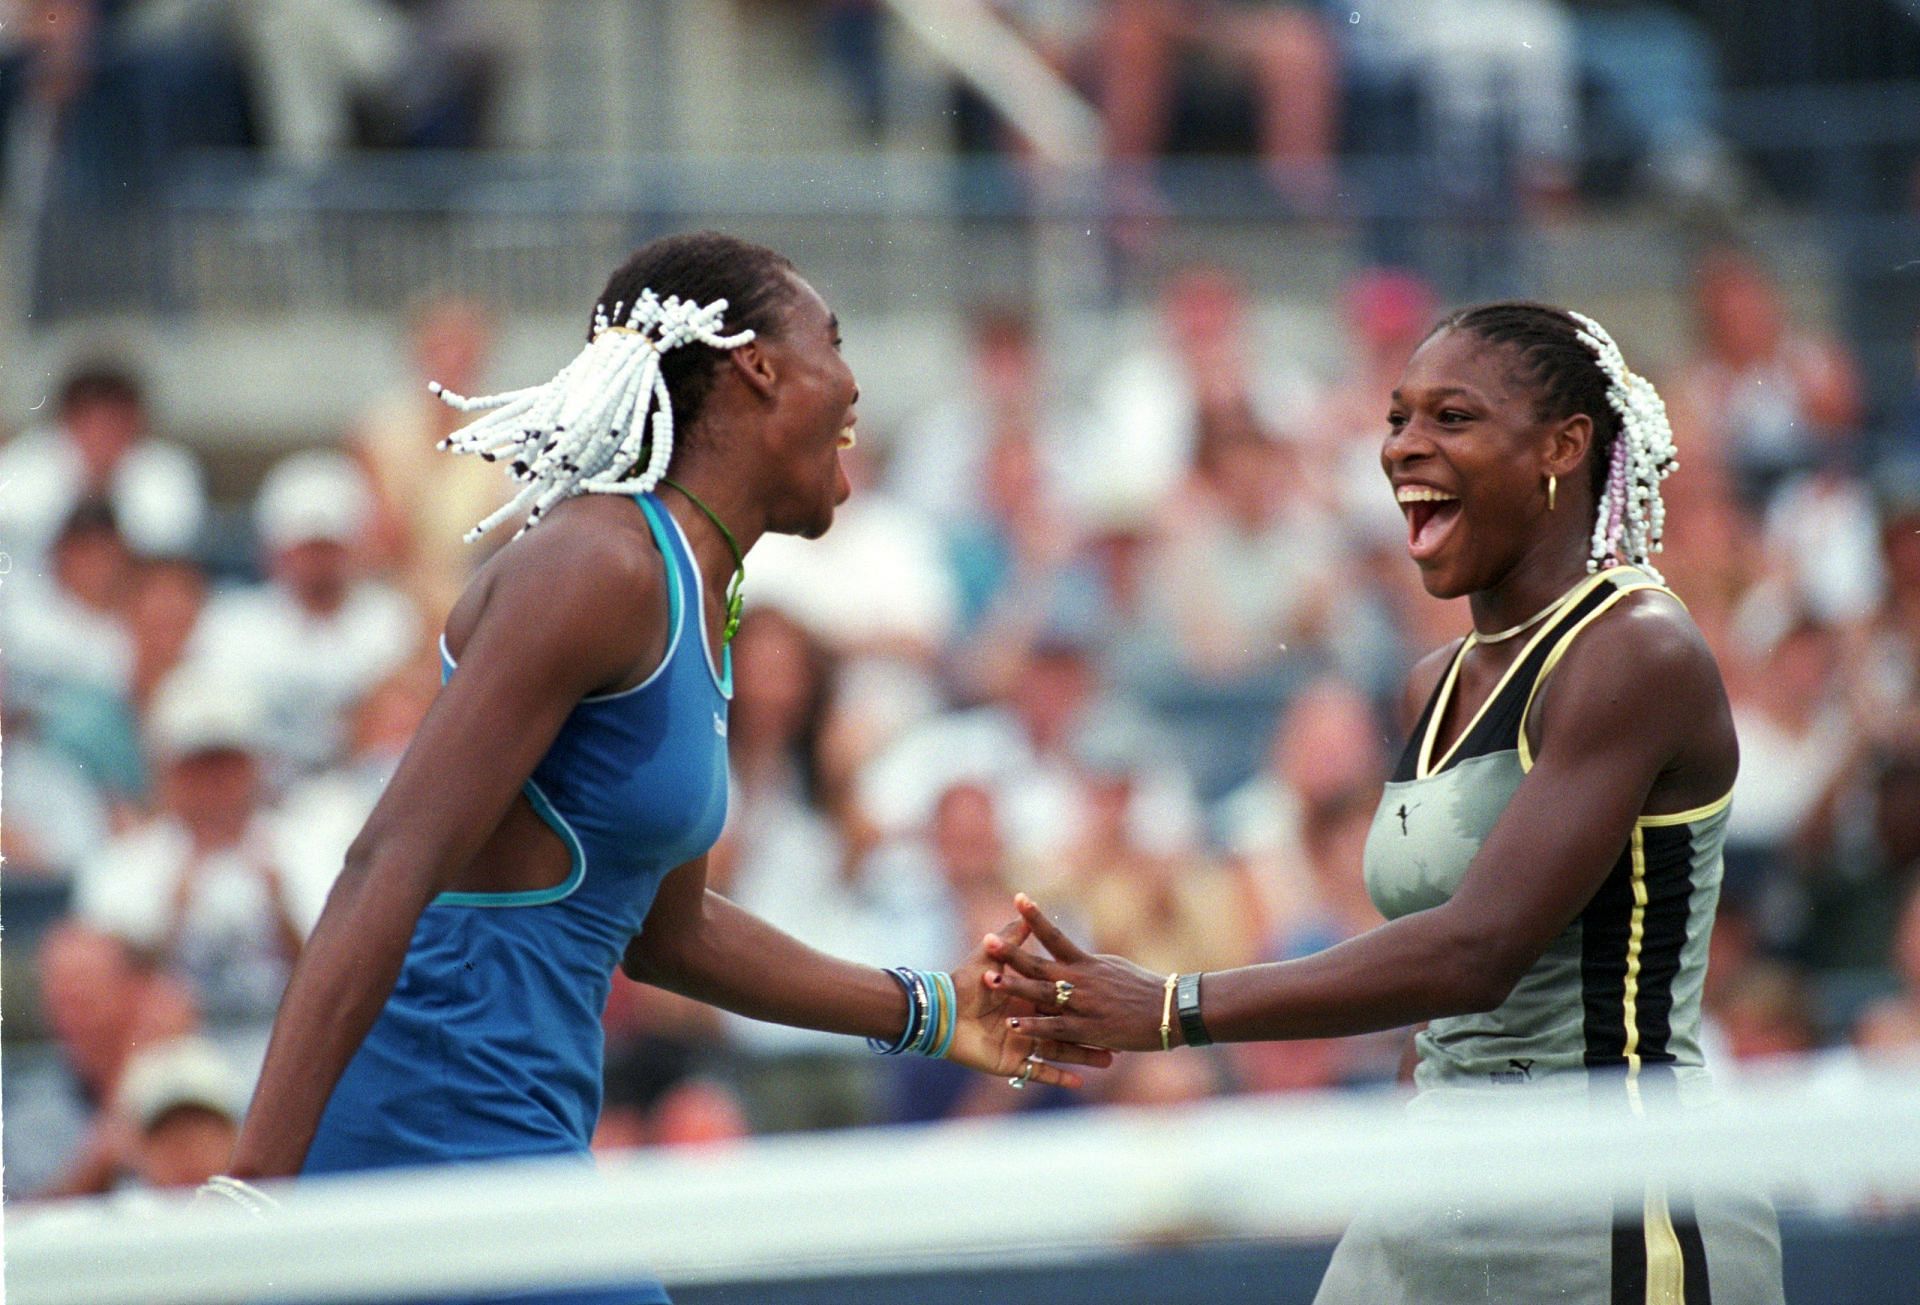 Venus and Serena Williams have faced each other 31 times on court